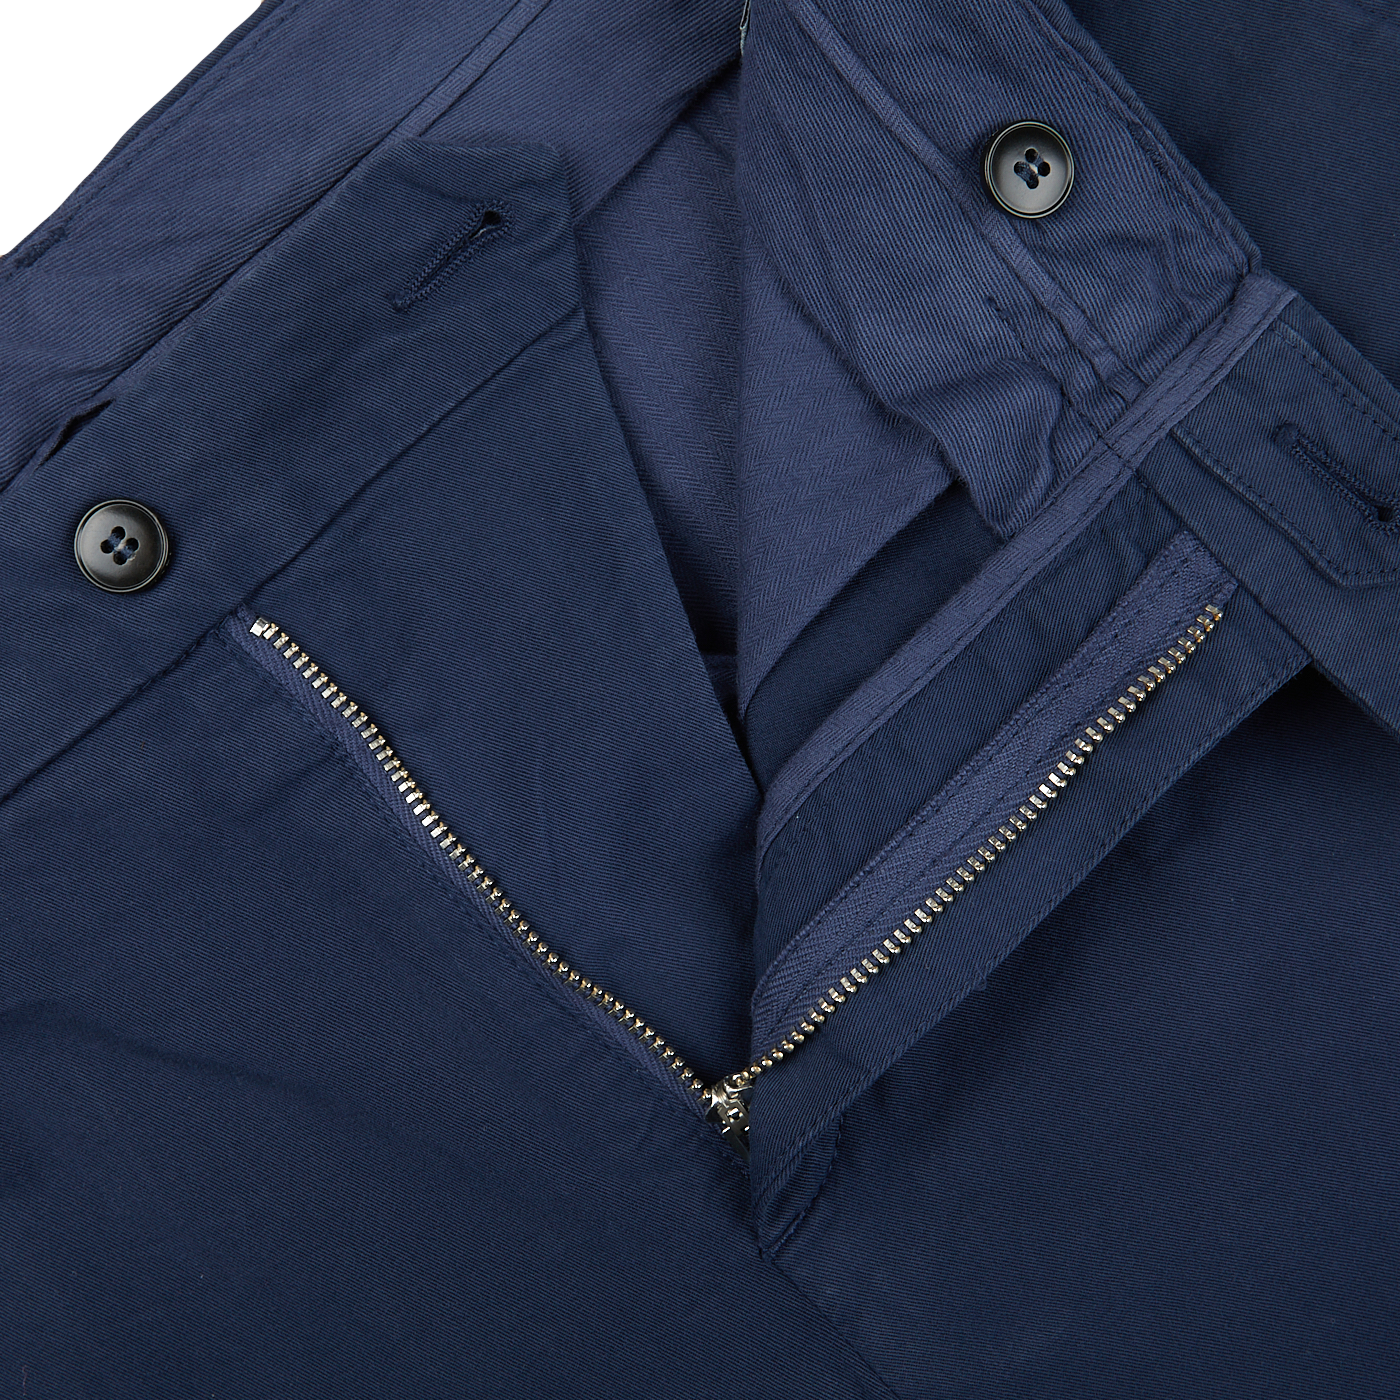 A close up of a Canali Navy Blue Cotton Stretch Flat Front Chinos with zippers.